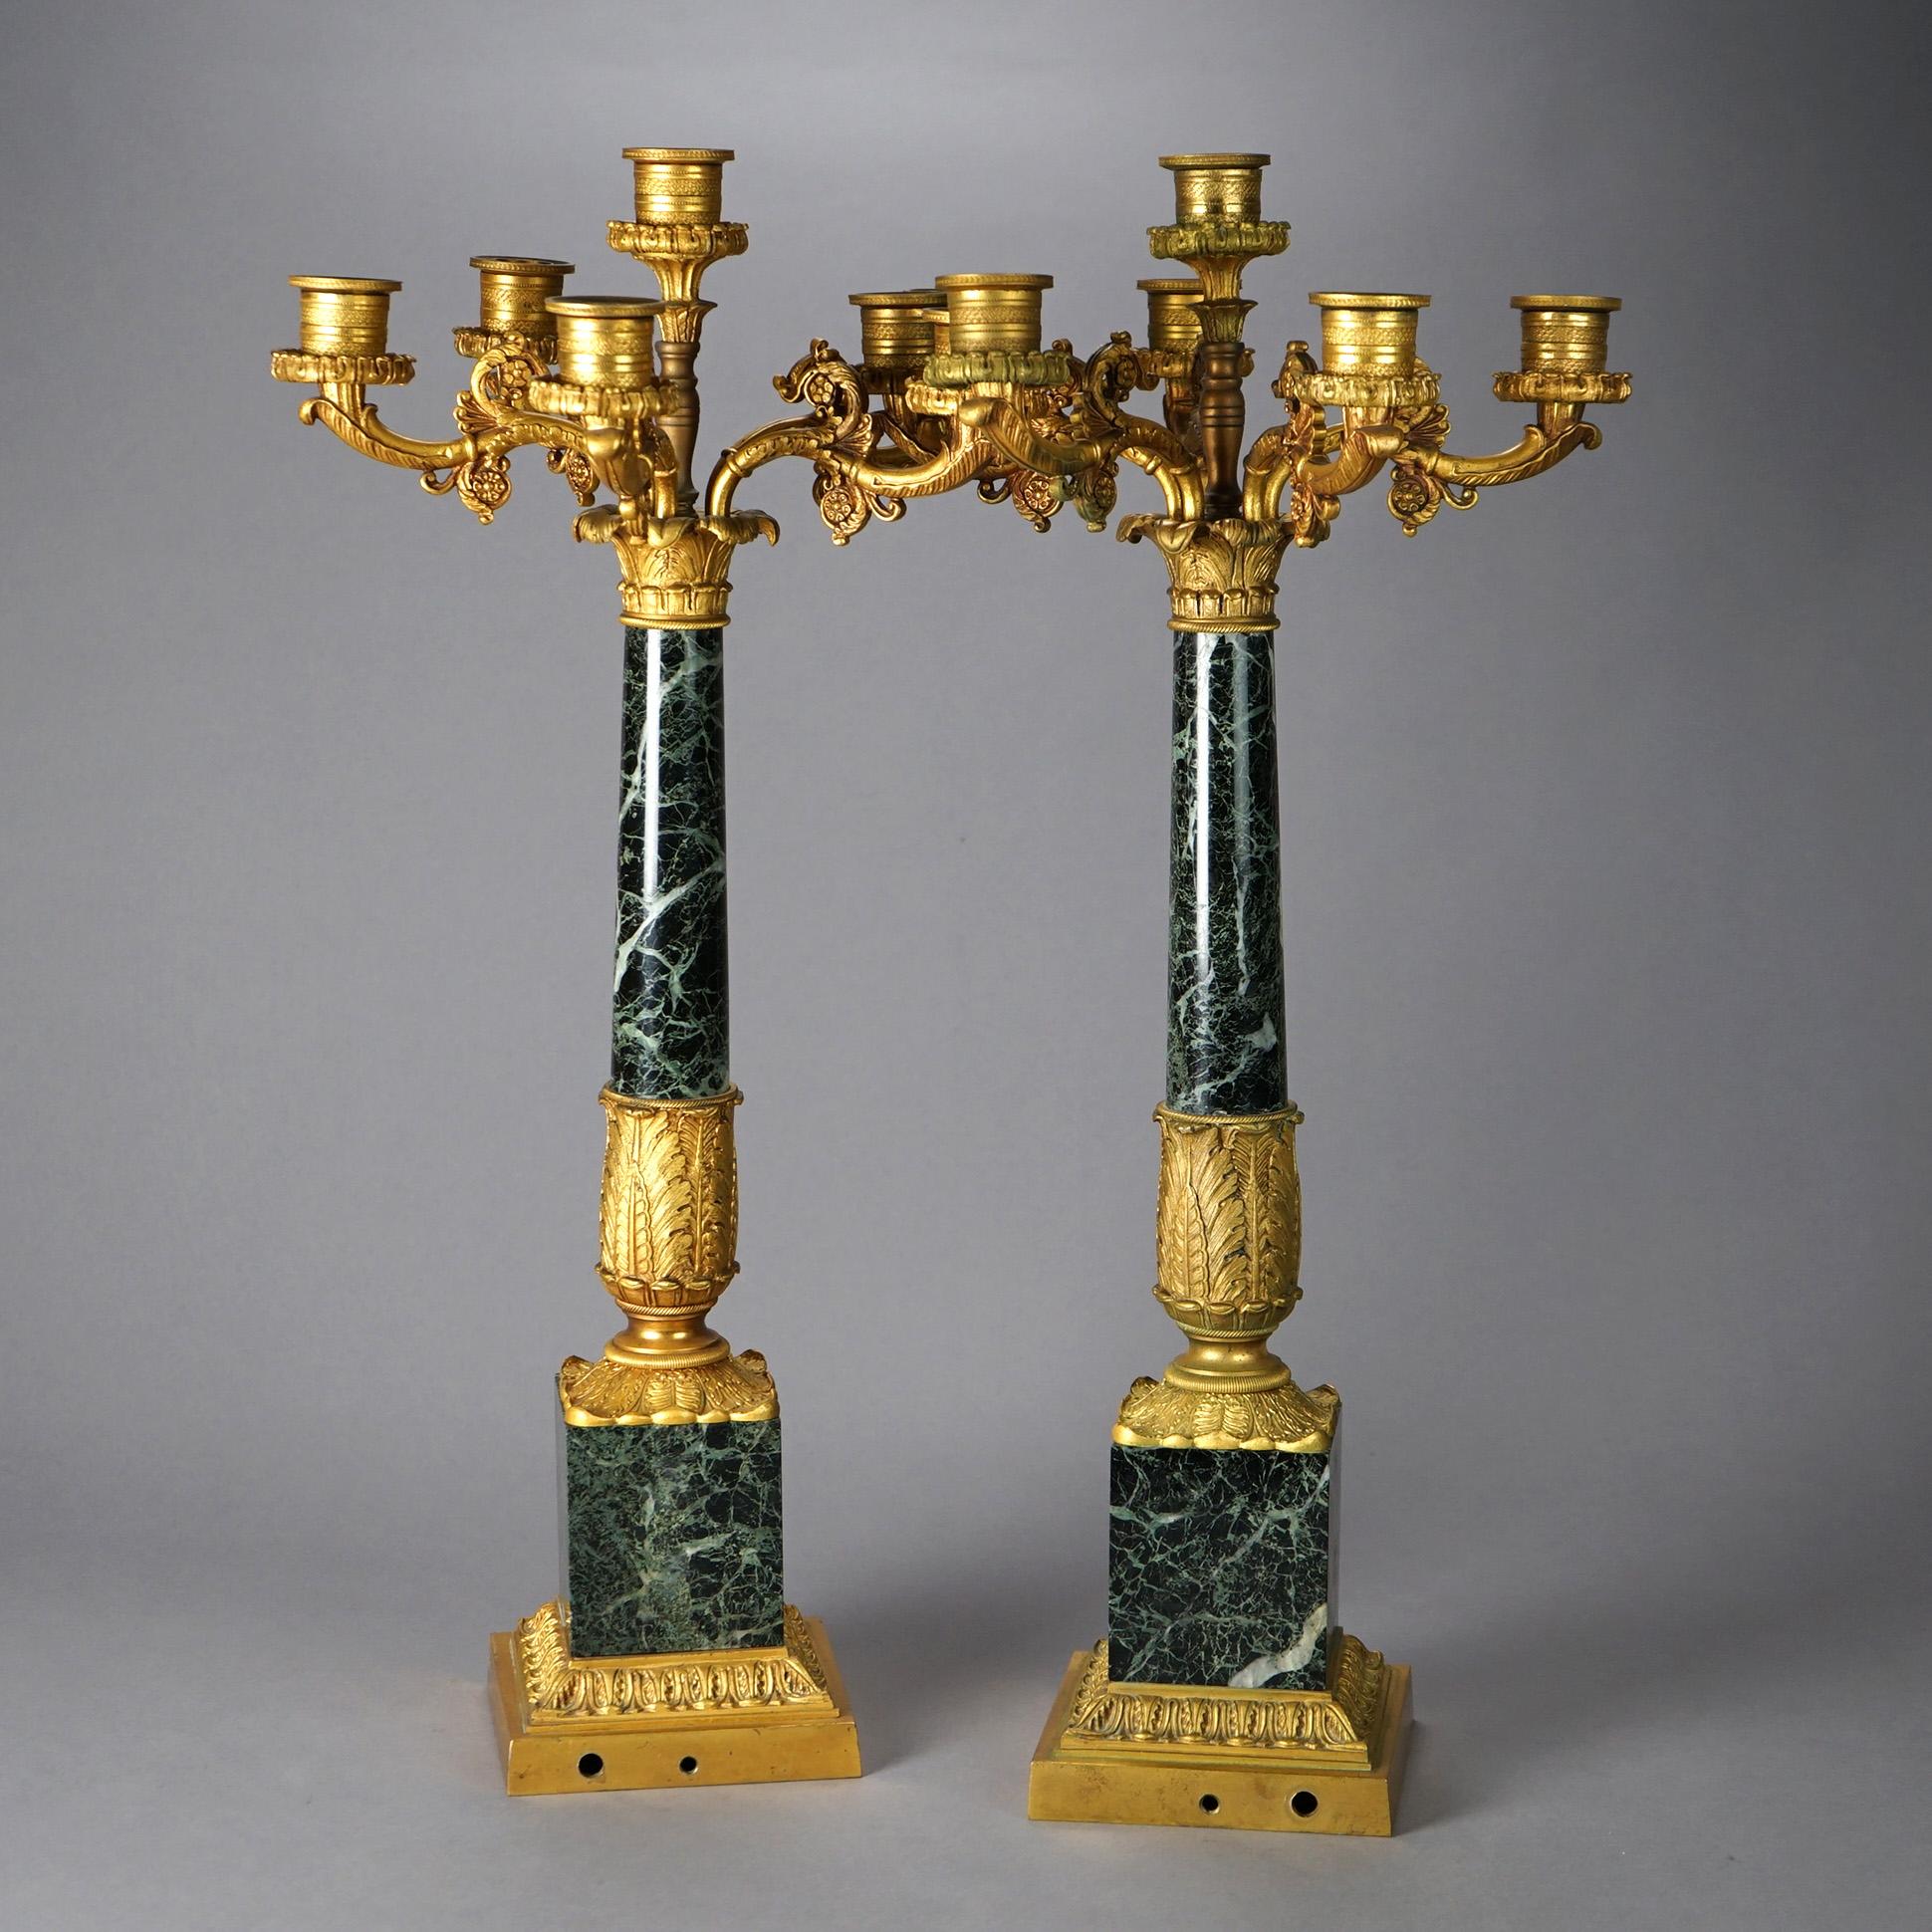 Antique Pair of French Empire Gilt Bronze & Marble Candelabra19th C For Sale 5